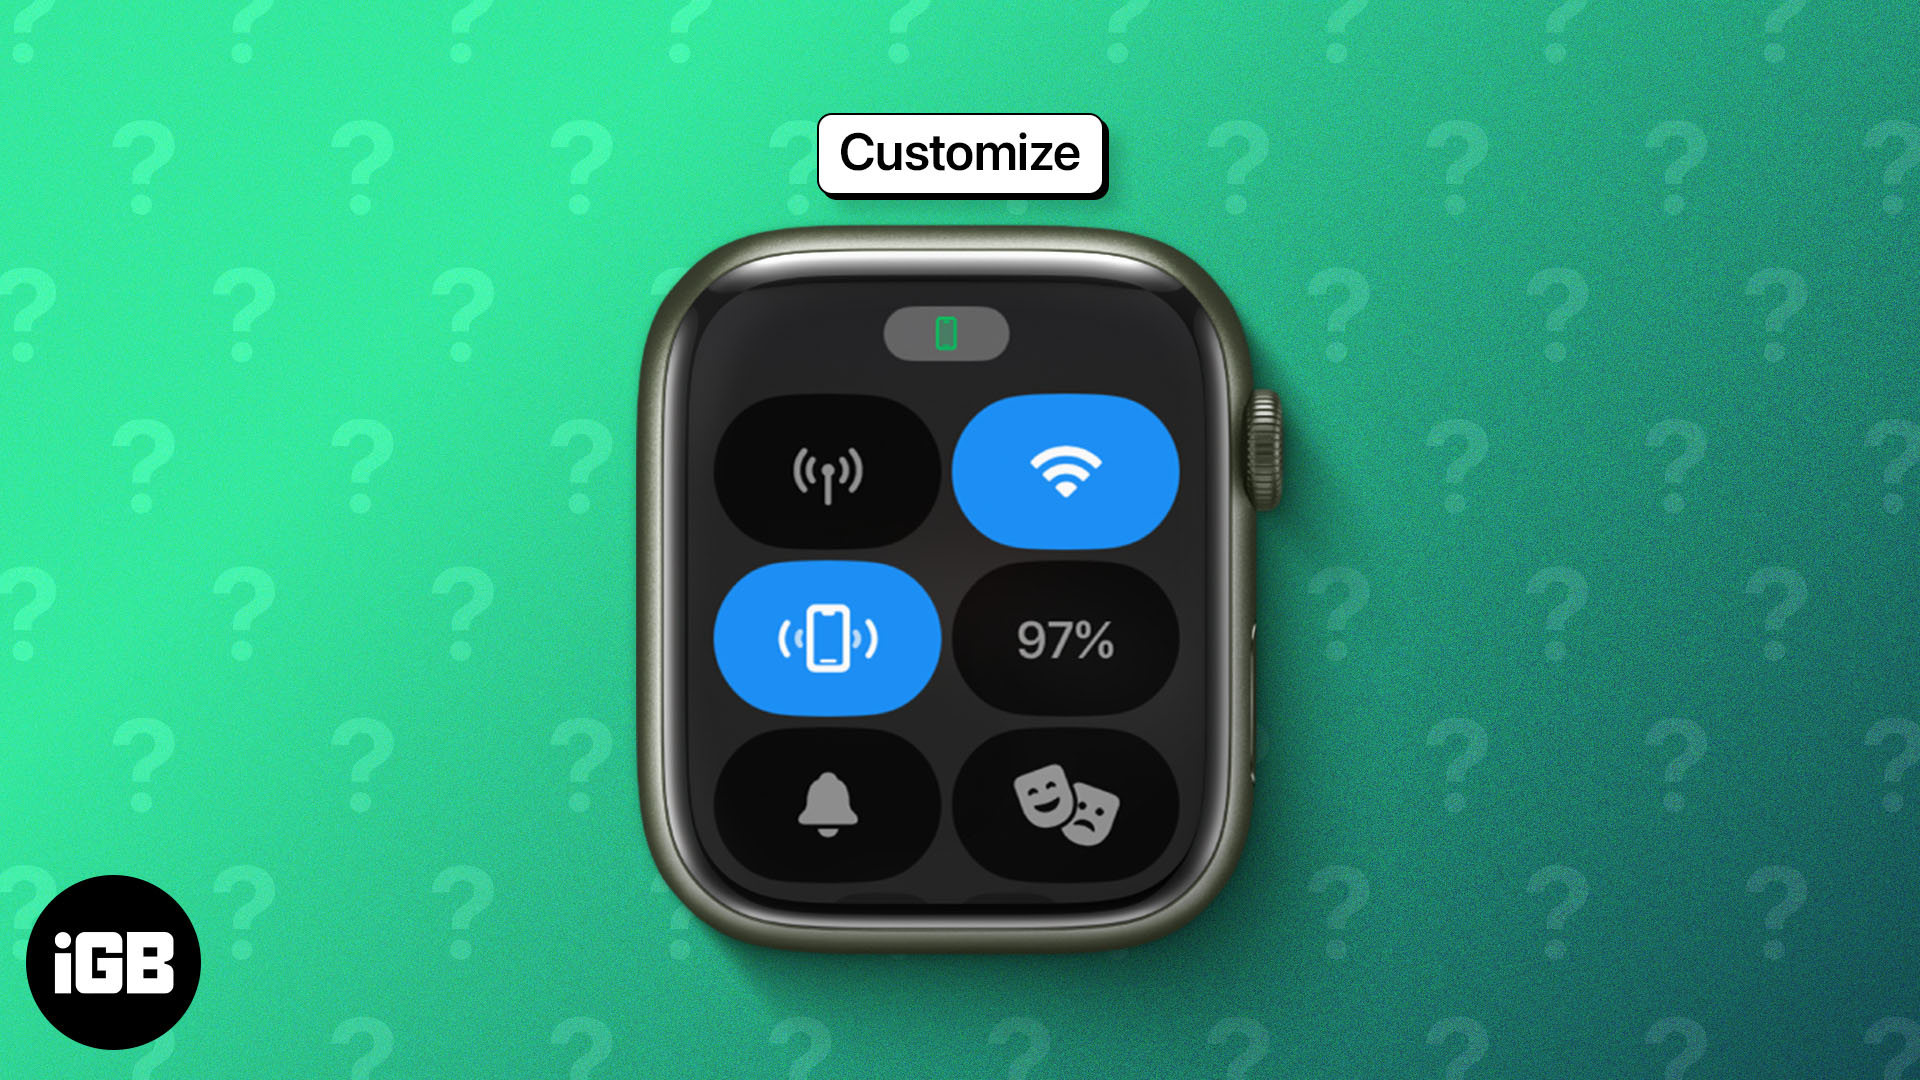 How to use Apple Watch Control Center